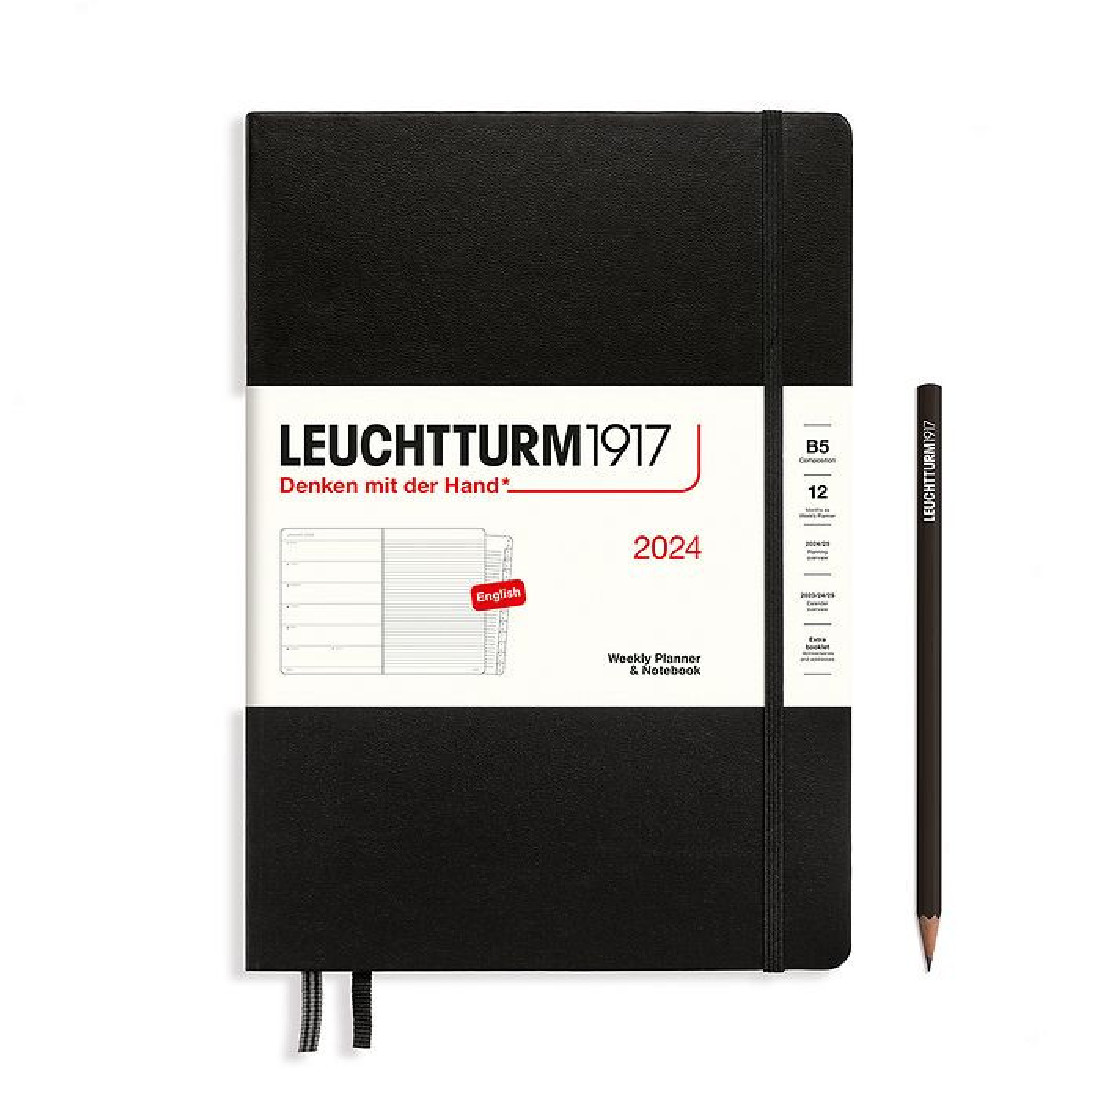 Leuchtturm 1917 Weekly Planner and Notebook 2024 Black B5 Hard Cover